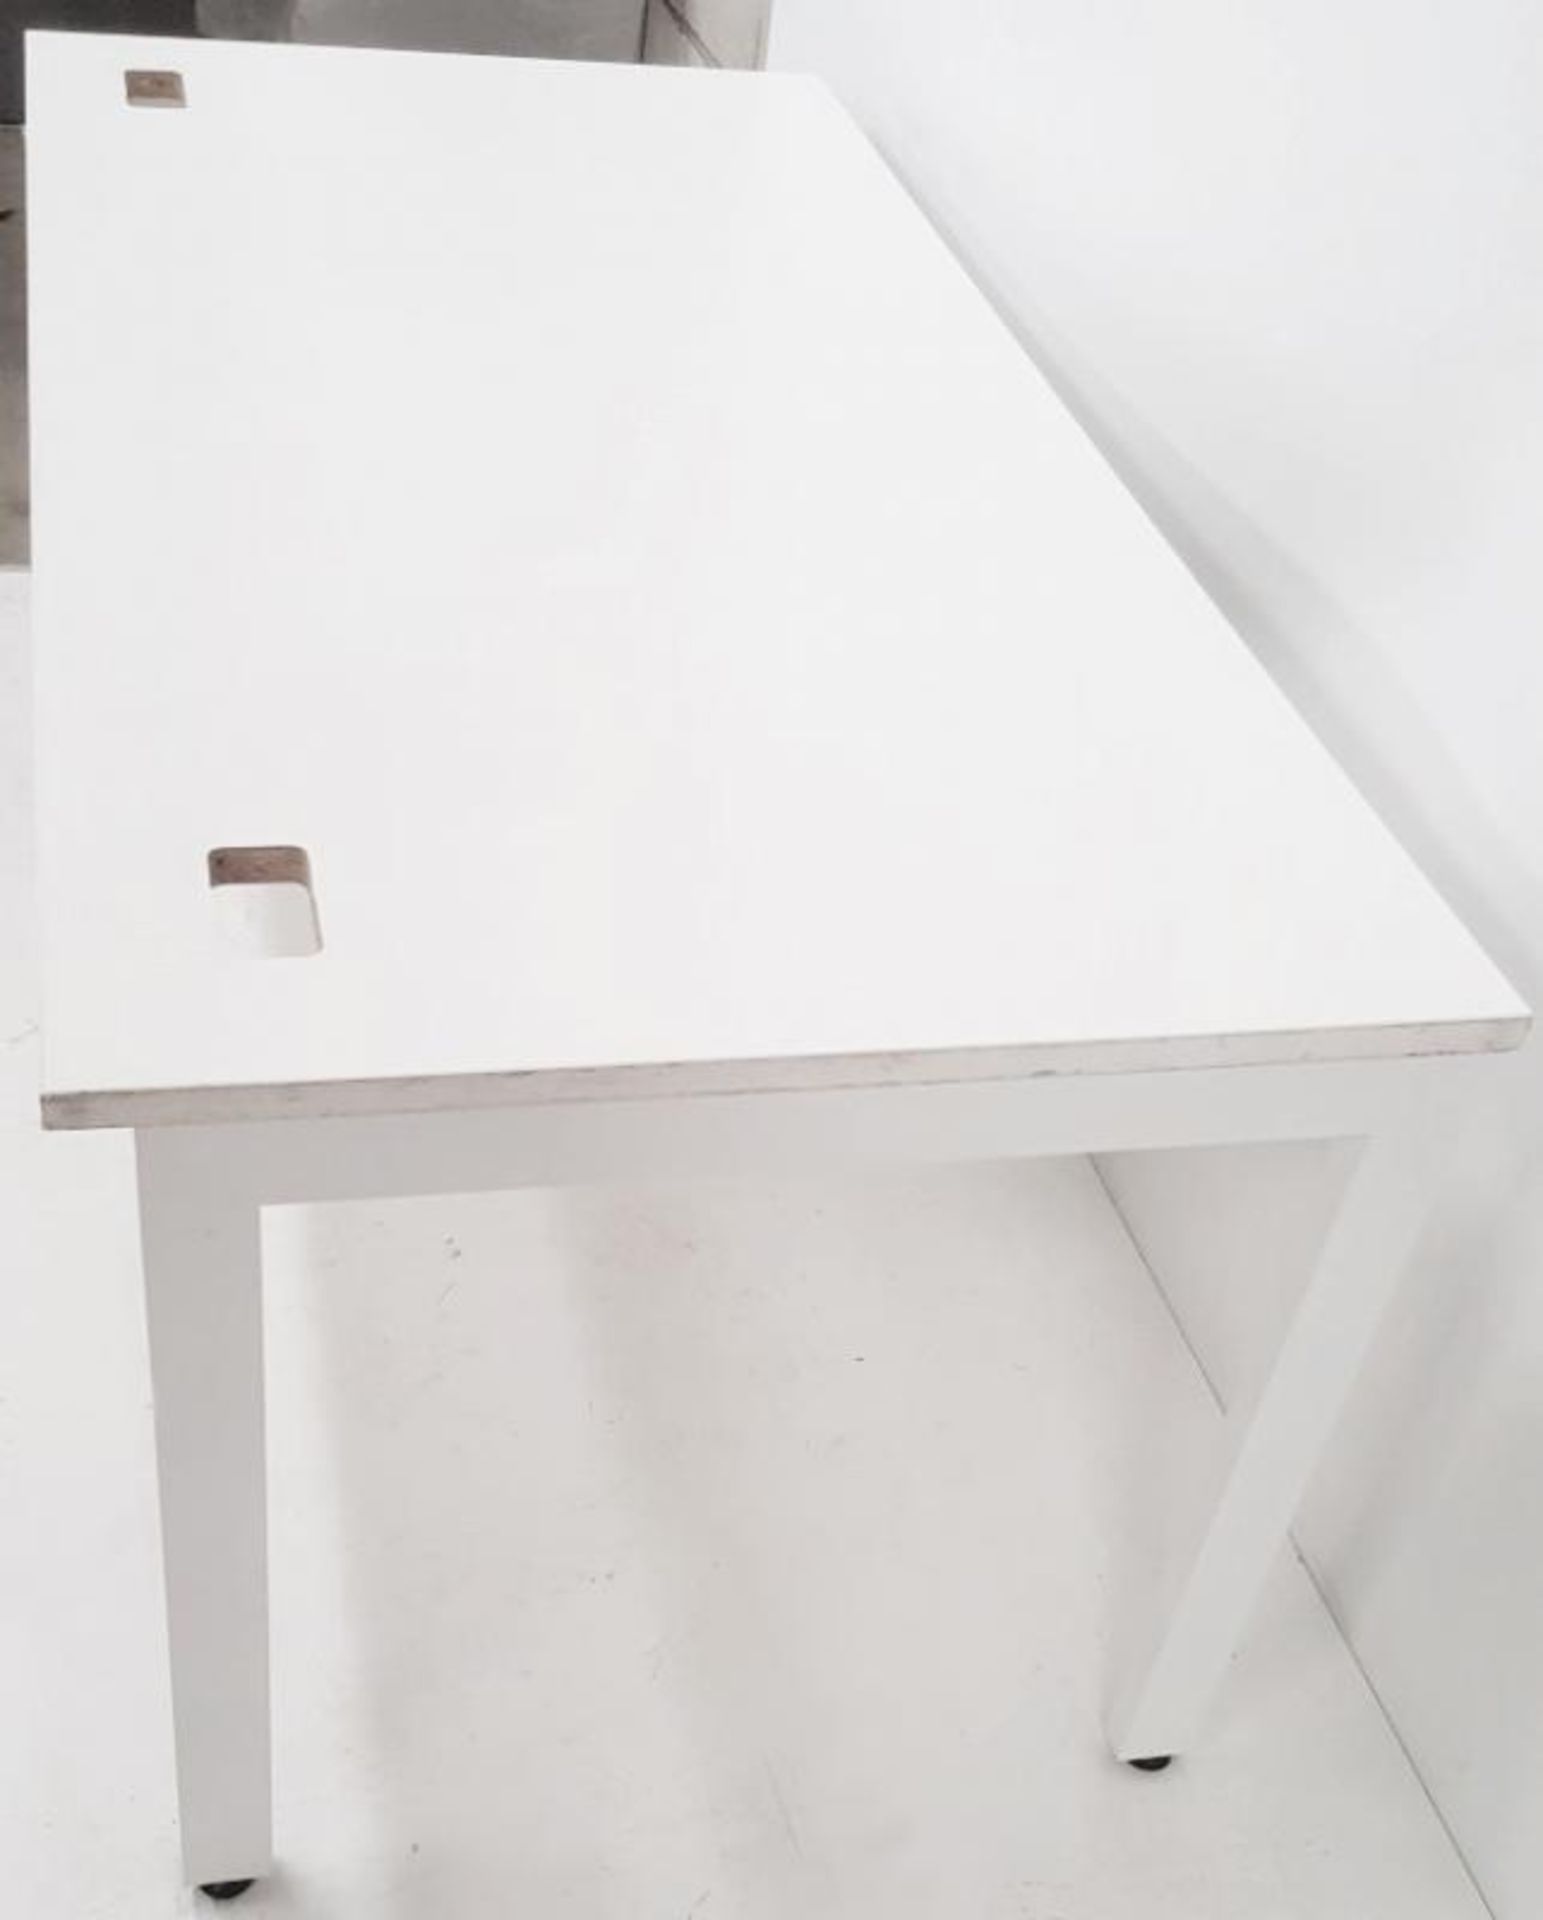 1 x Large Premium Office Desk In White - Used, In Good Condition - Dimensions: W160 x W80 x H74cm - - Image 4 of 5